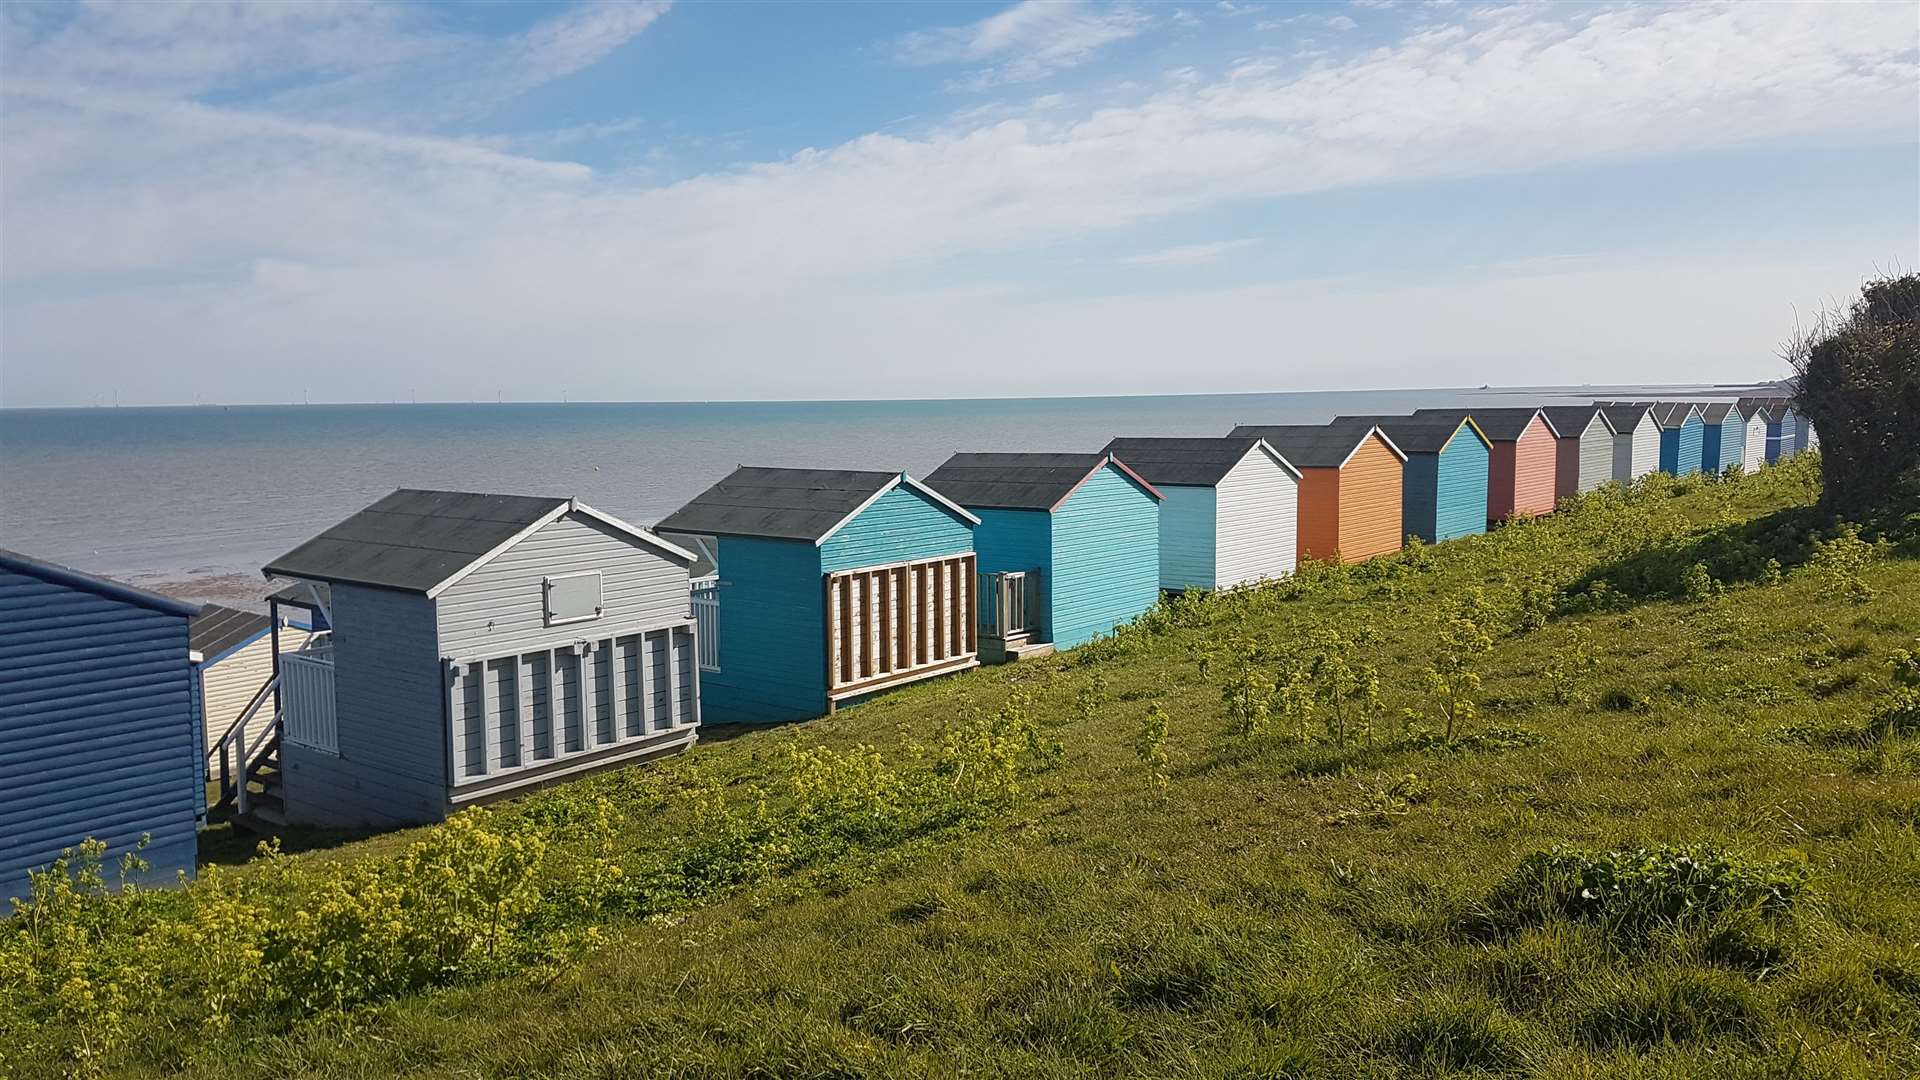 Some of the existing beach huts in Tankerton, Whitstable